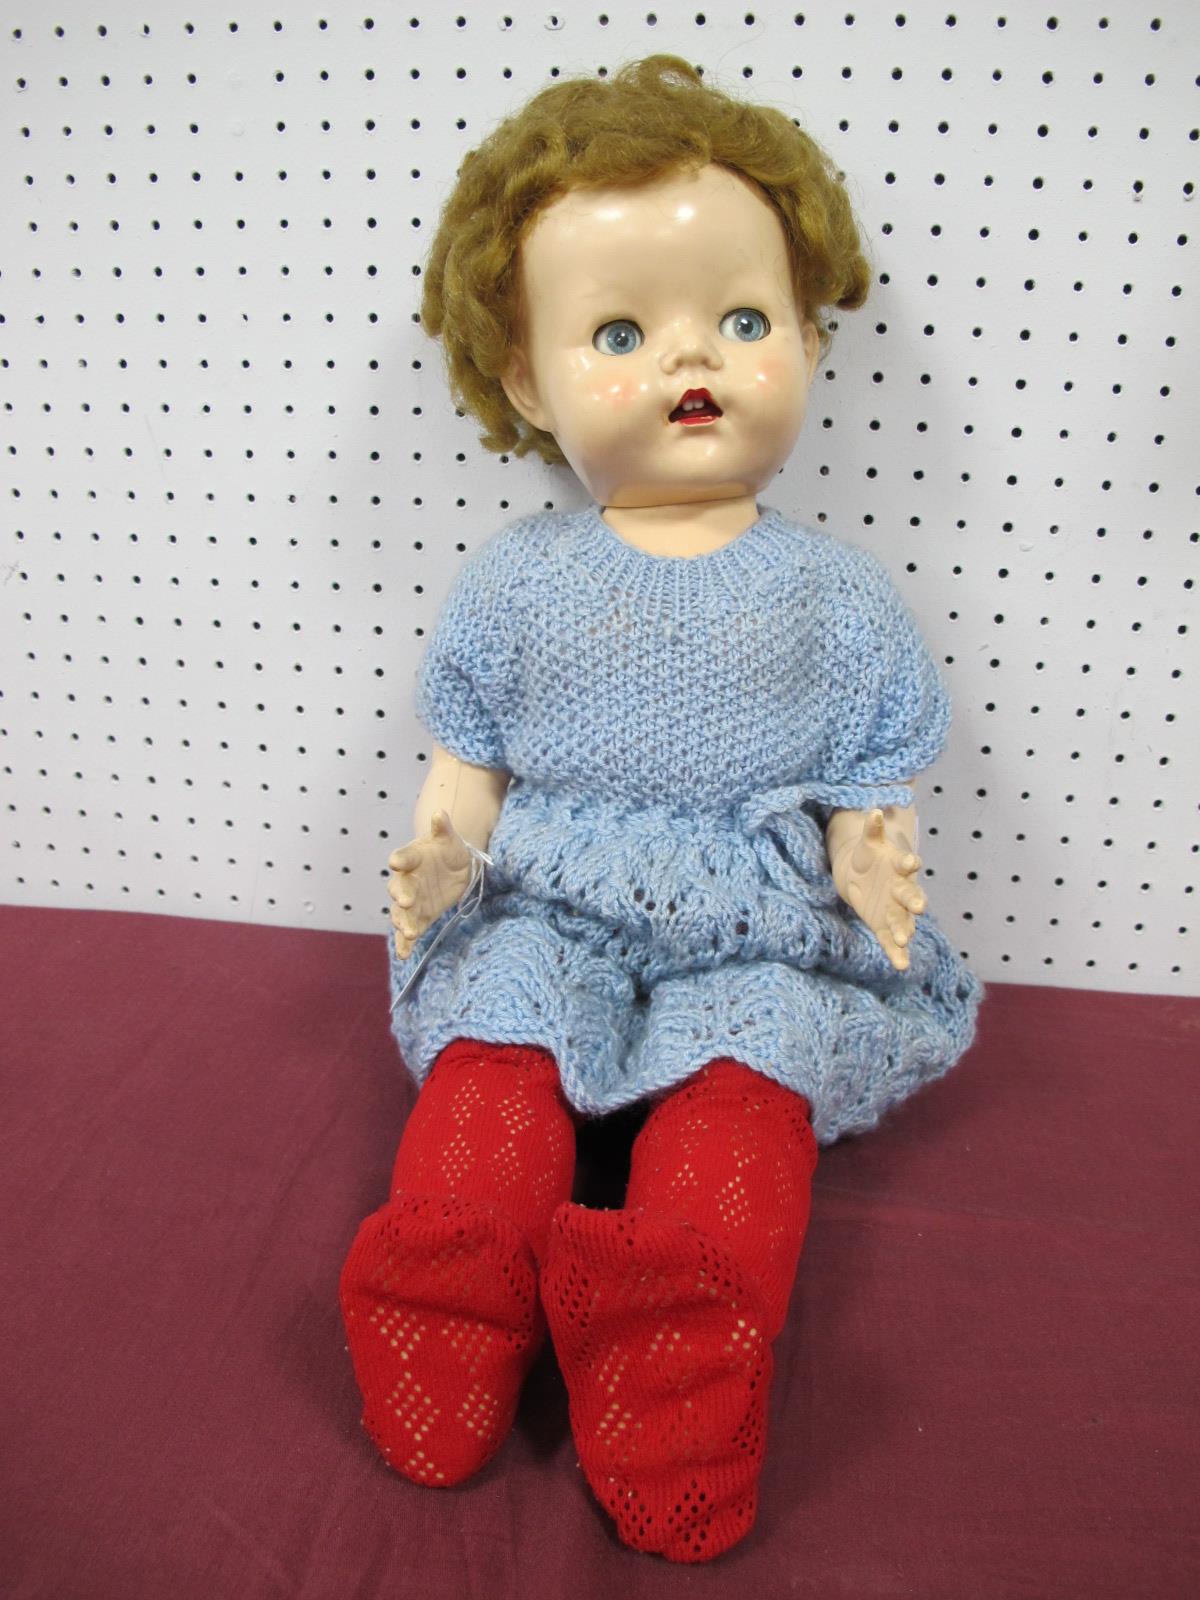 A Circa 1950's Hard Plastic Doll by Pedigree (England), measuring approximately 56cm tall.